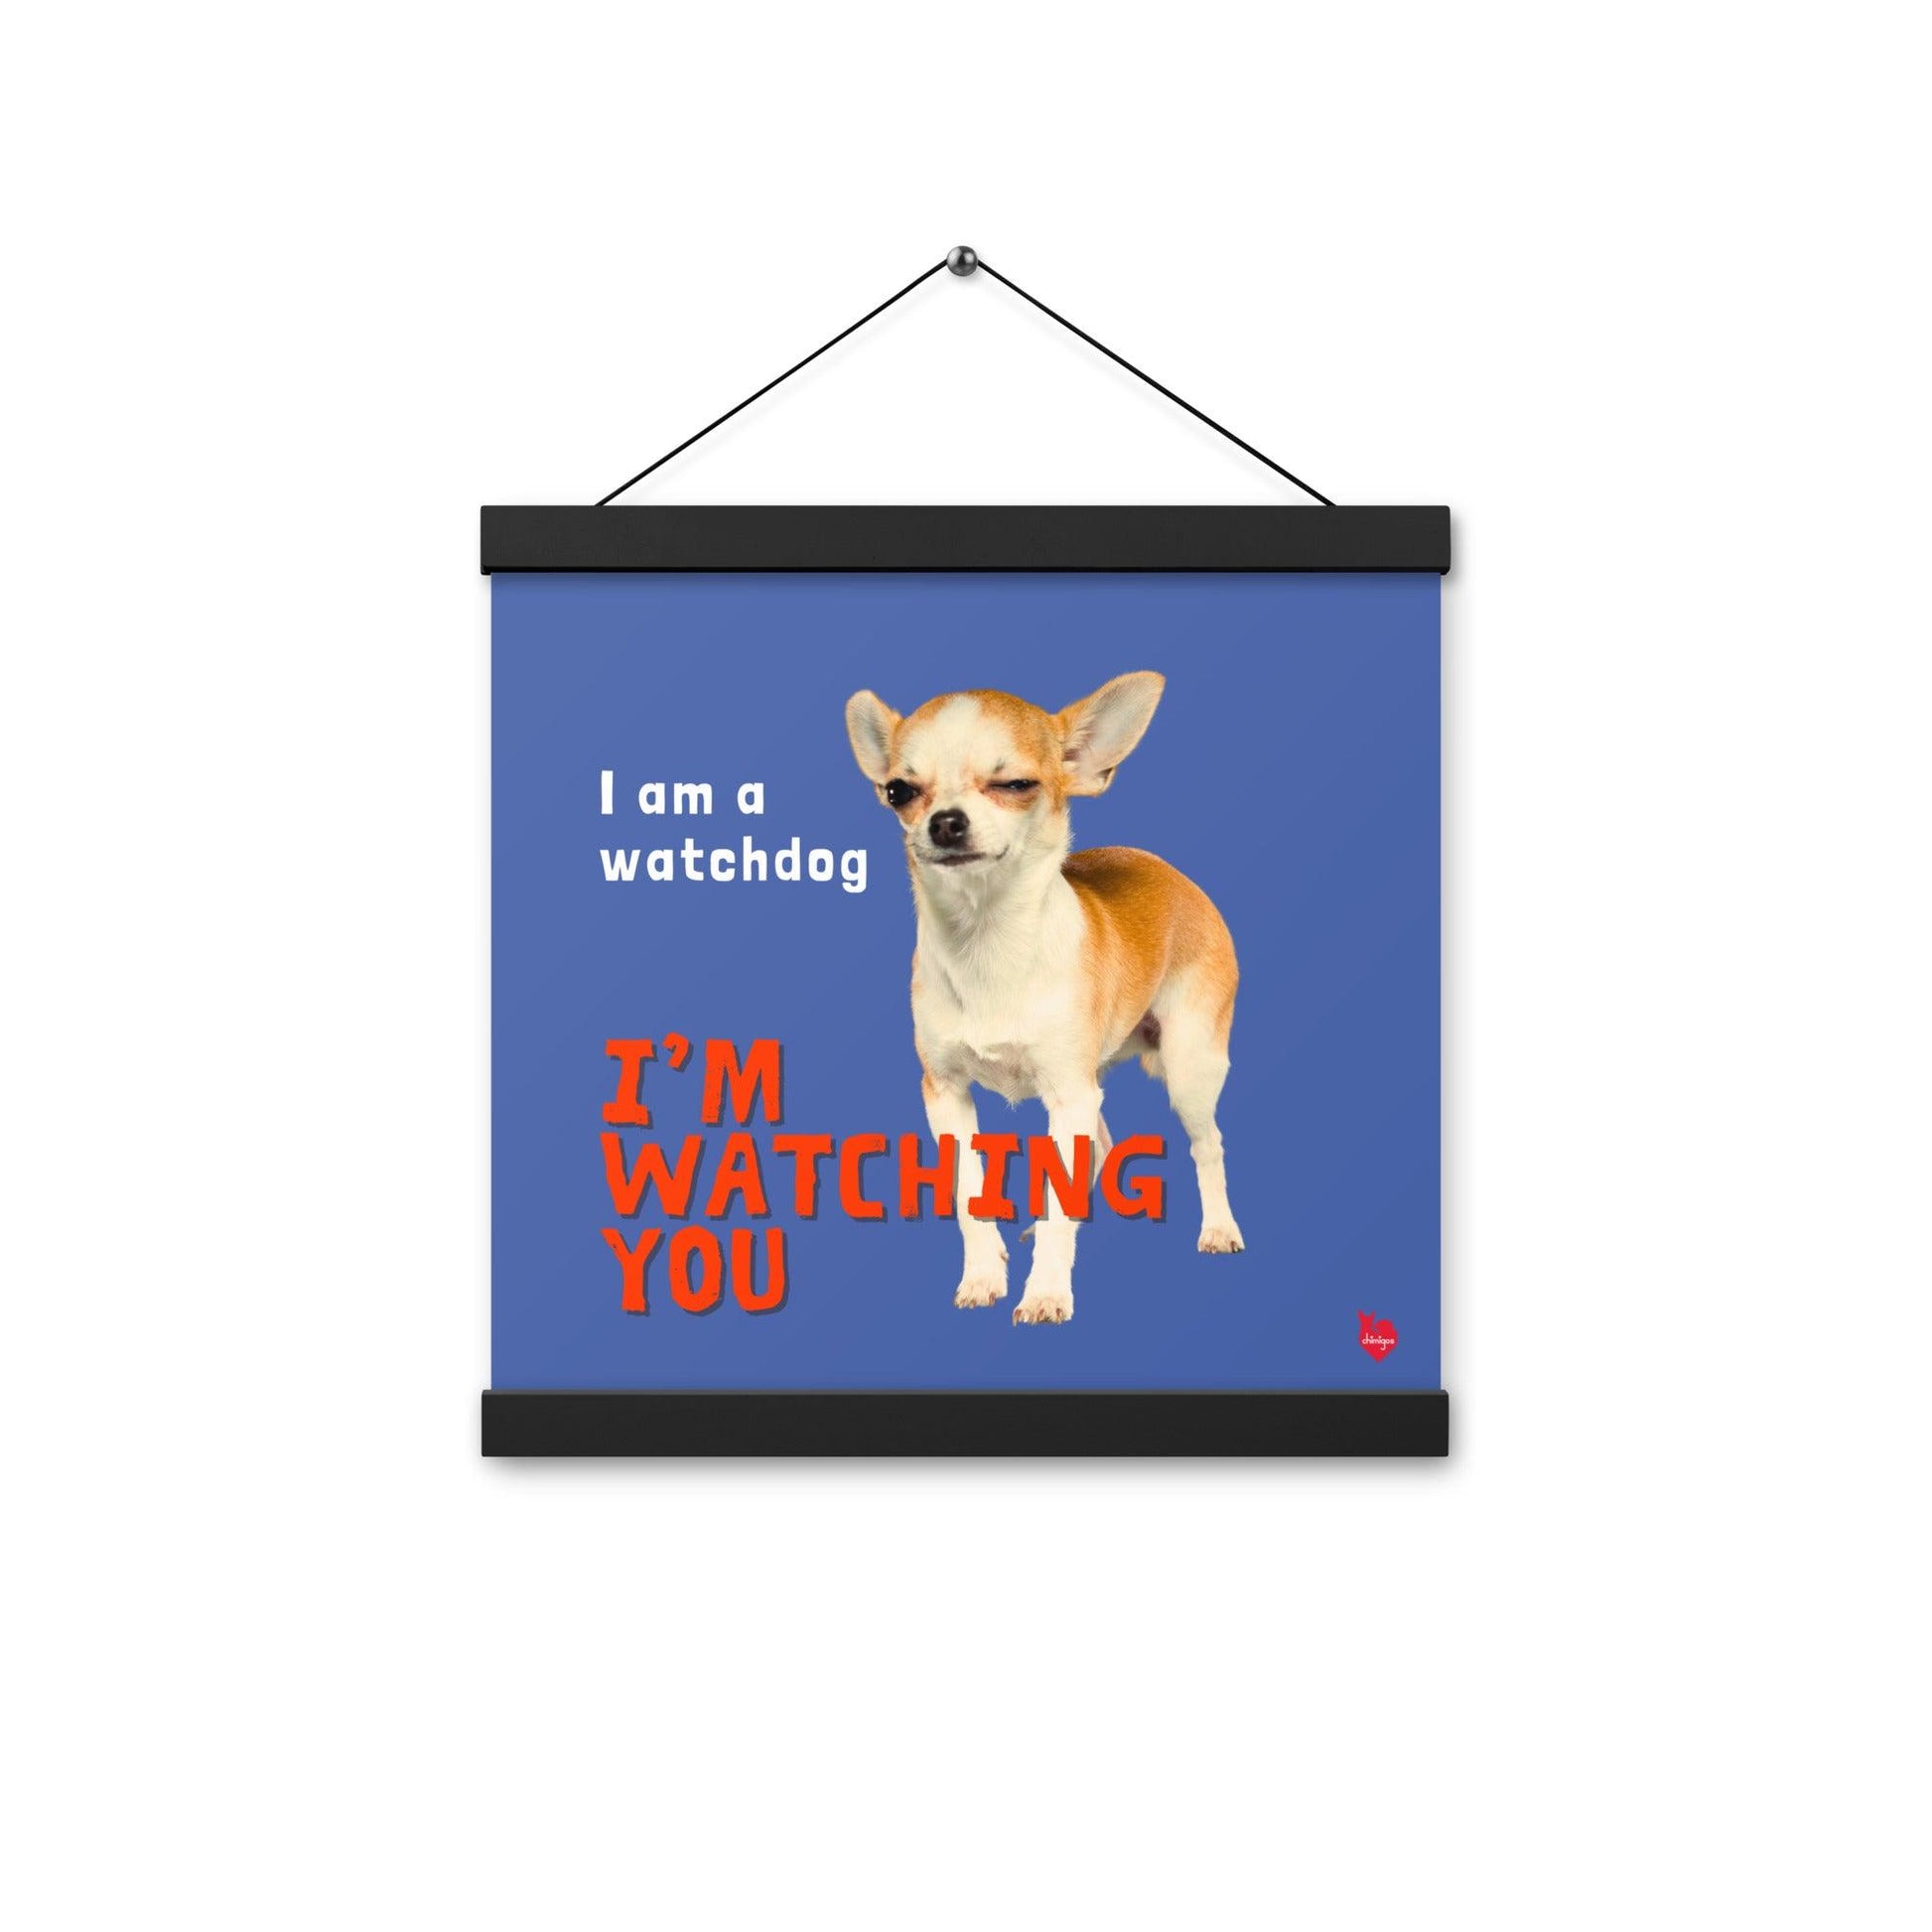 I am a watchdog; I'M WATCHING YOU - blue chihuahua meme poster with real wood hangers.  A cheeky gold, fawn and white shorthair chihuahua winks as they inform visitors that they will be watching their every move. A funny and stylish gift idea for someone whose house is presided over by a feisty and alert little chi. Perfect for the new chihuahua parent or as a housewarming gift!